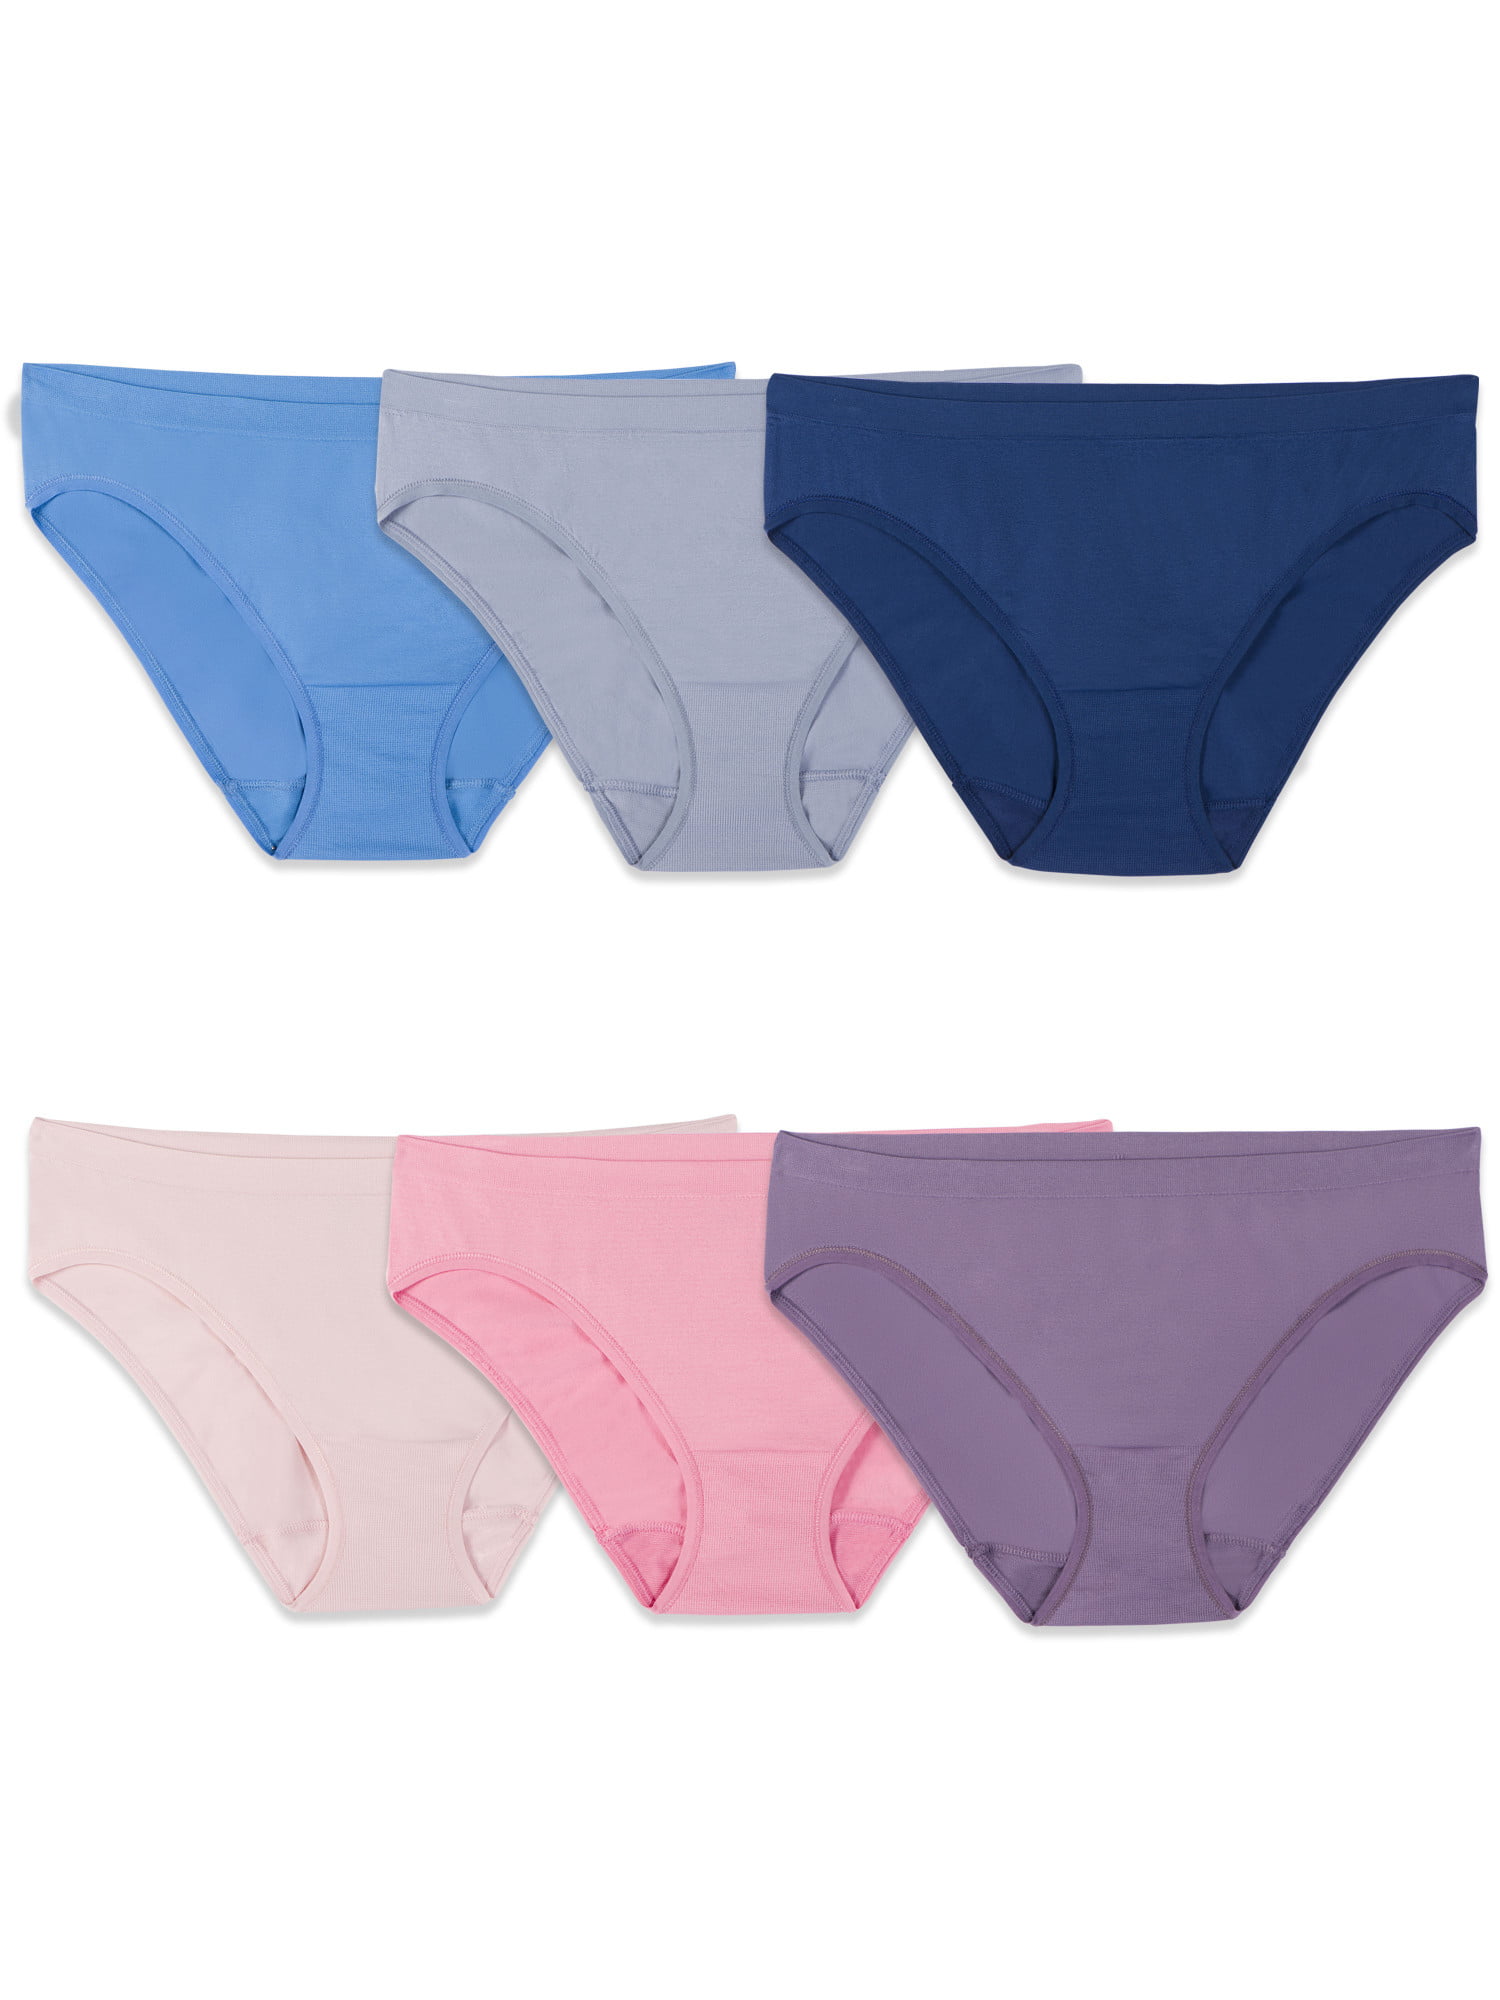 Fruit of the Loom Women's 360 Stretch Seamless Low-Rise Brief Underwear, 6  Pack, Sizes S-2XL 